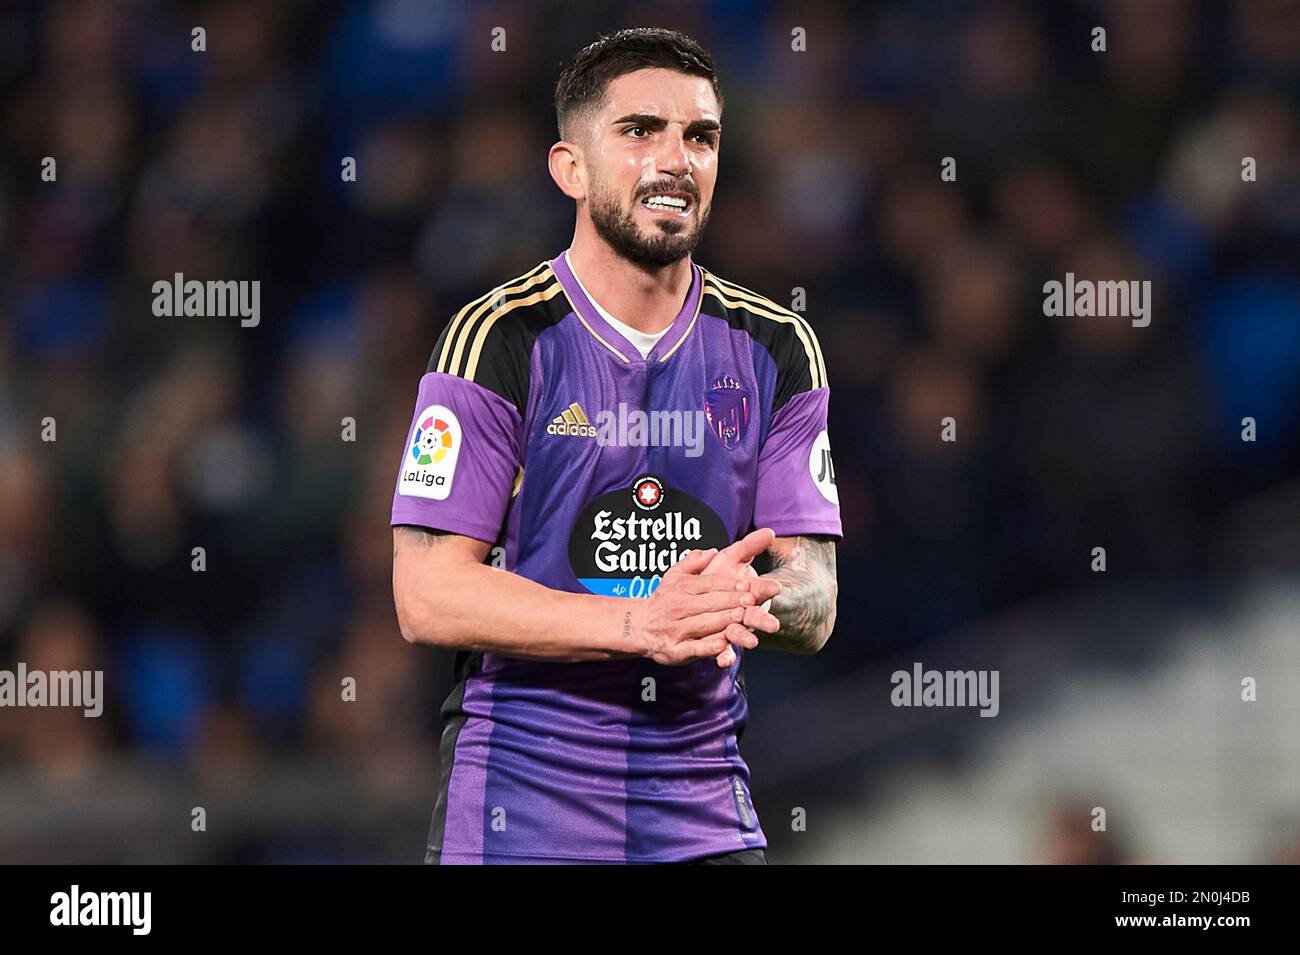 Ramon 'Monchu' of Real Valladolid CF during the La Liga match between Real Sociedad and Real Valladolid played at Reale Arena Stadium on February 5, in Spain. (Photo